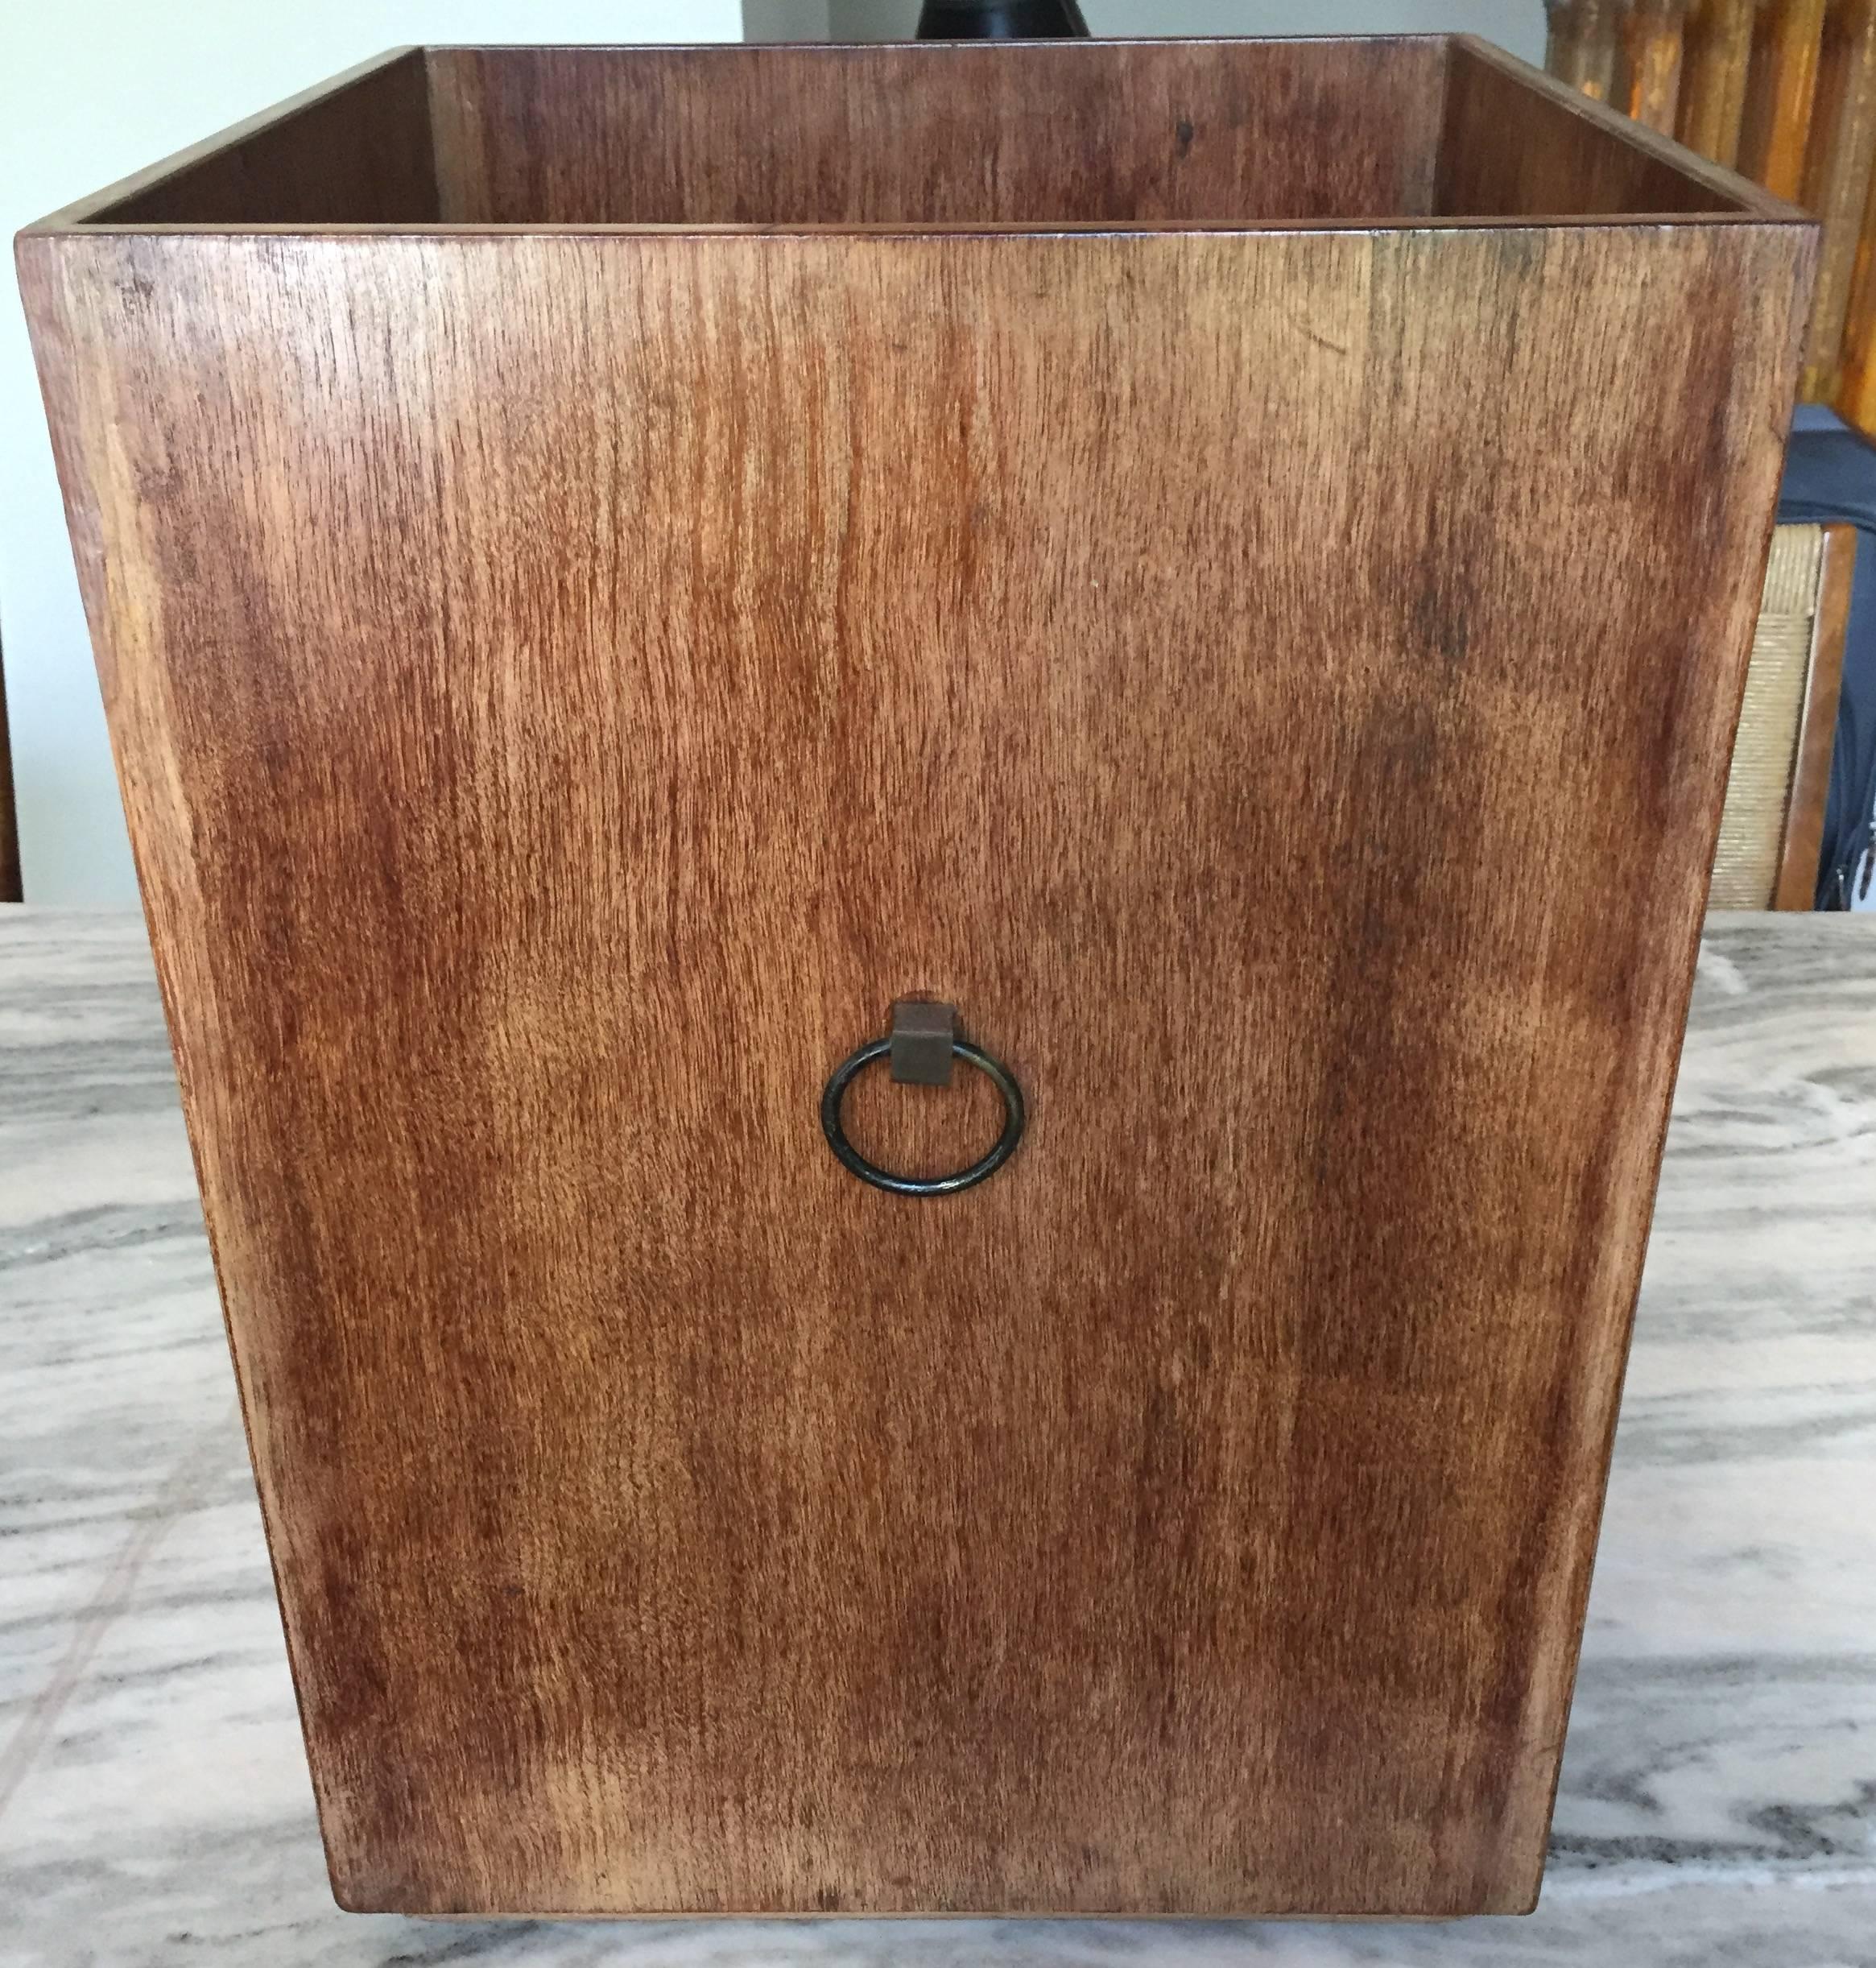 Walnut wastepaper basket with two brass ring handles from a 1938 custom Manhattan NY interior by Robsjohn-Gibbings. This is part of a library suite we acquired directly from the descendants of the couple who commissioned Gibbings to custom furnish